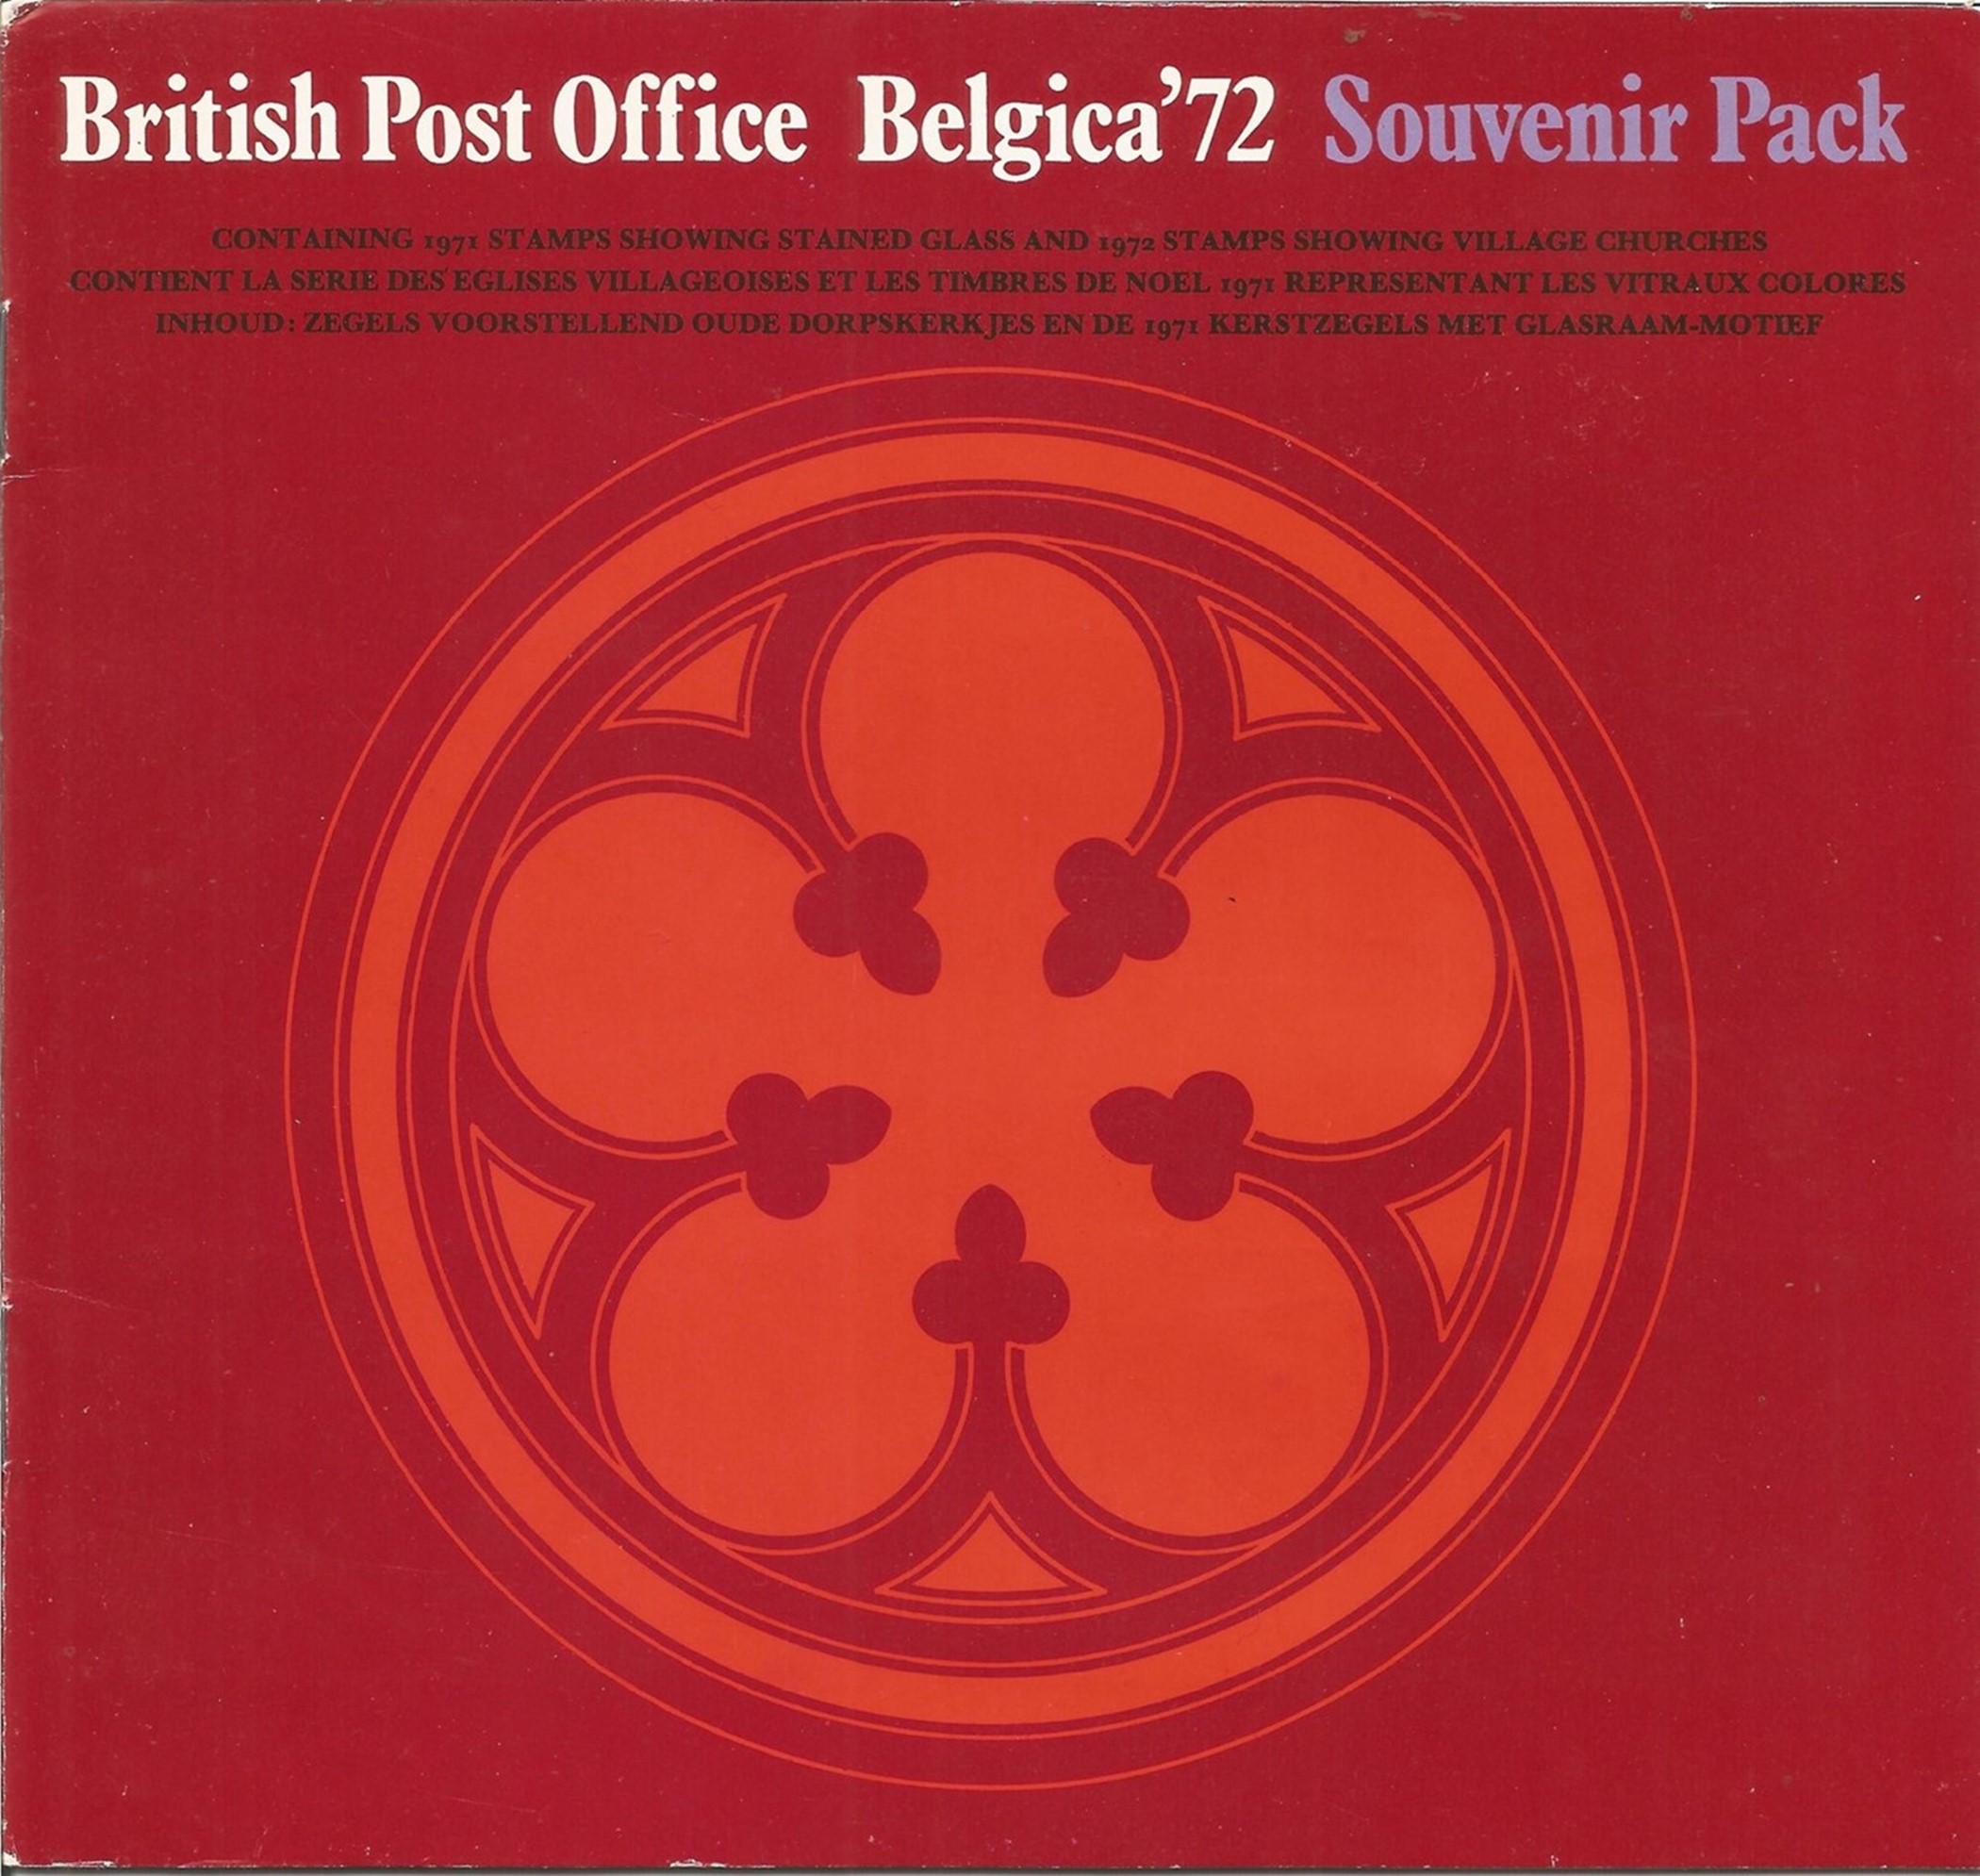 British Post Office Belgica' 72 Souvenir Pack. Good condition. We combine postage on multiple